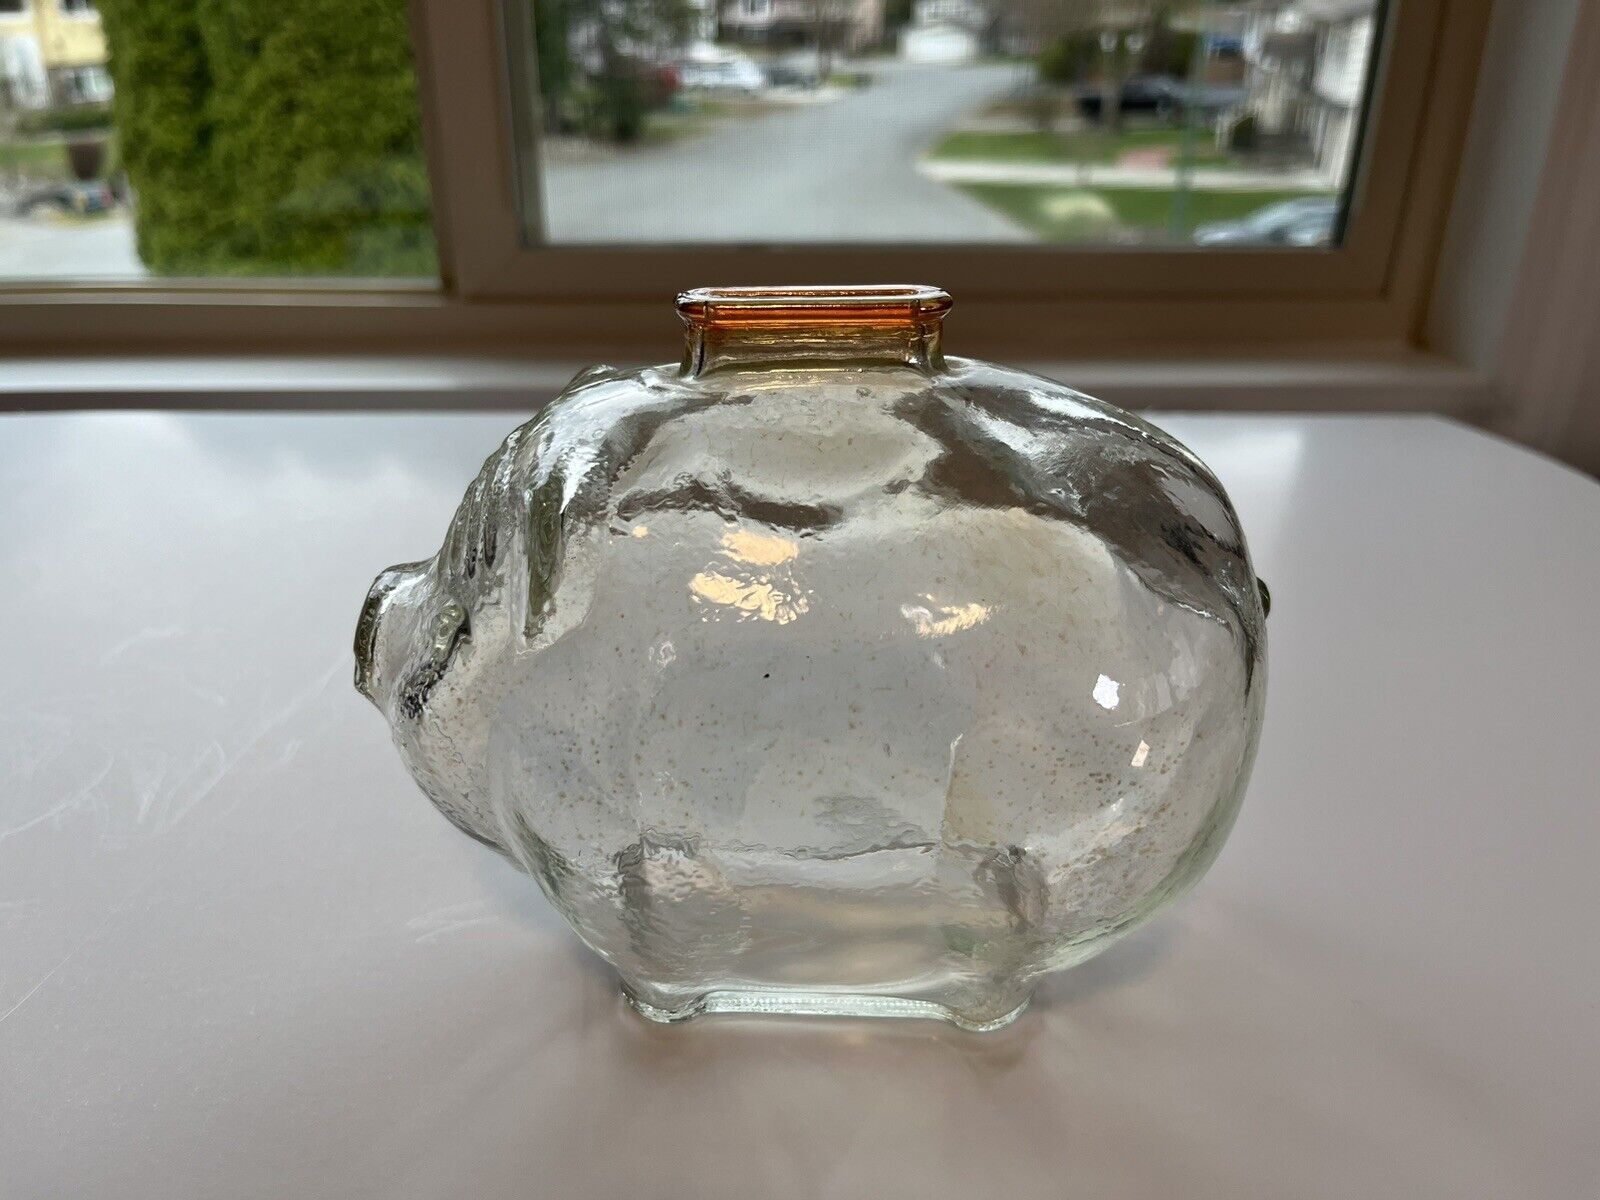 Vintage Anchor Hocking Glass Piggy Bank From The 1950s